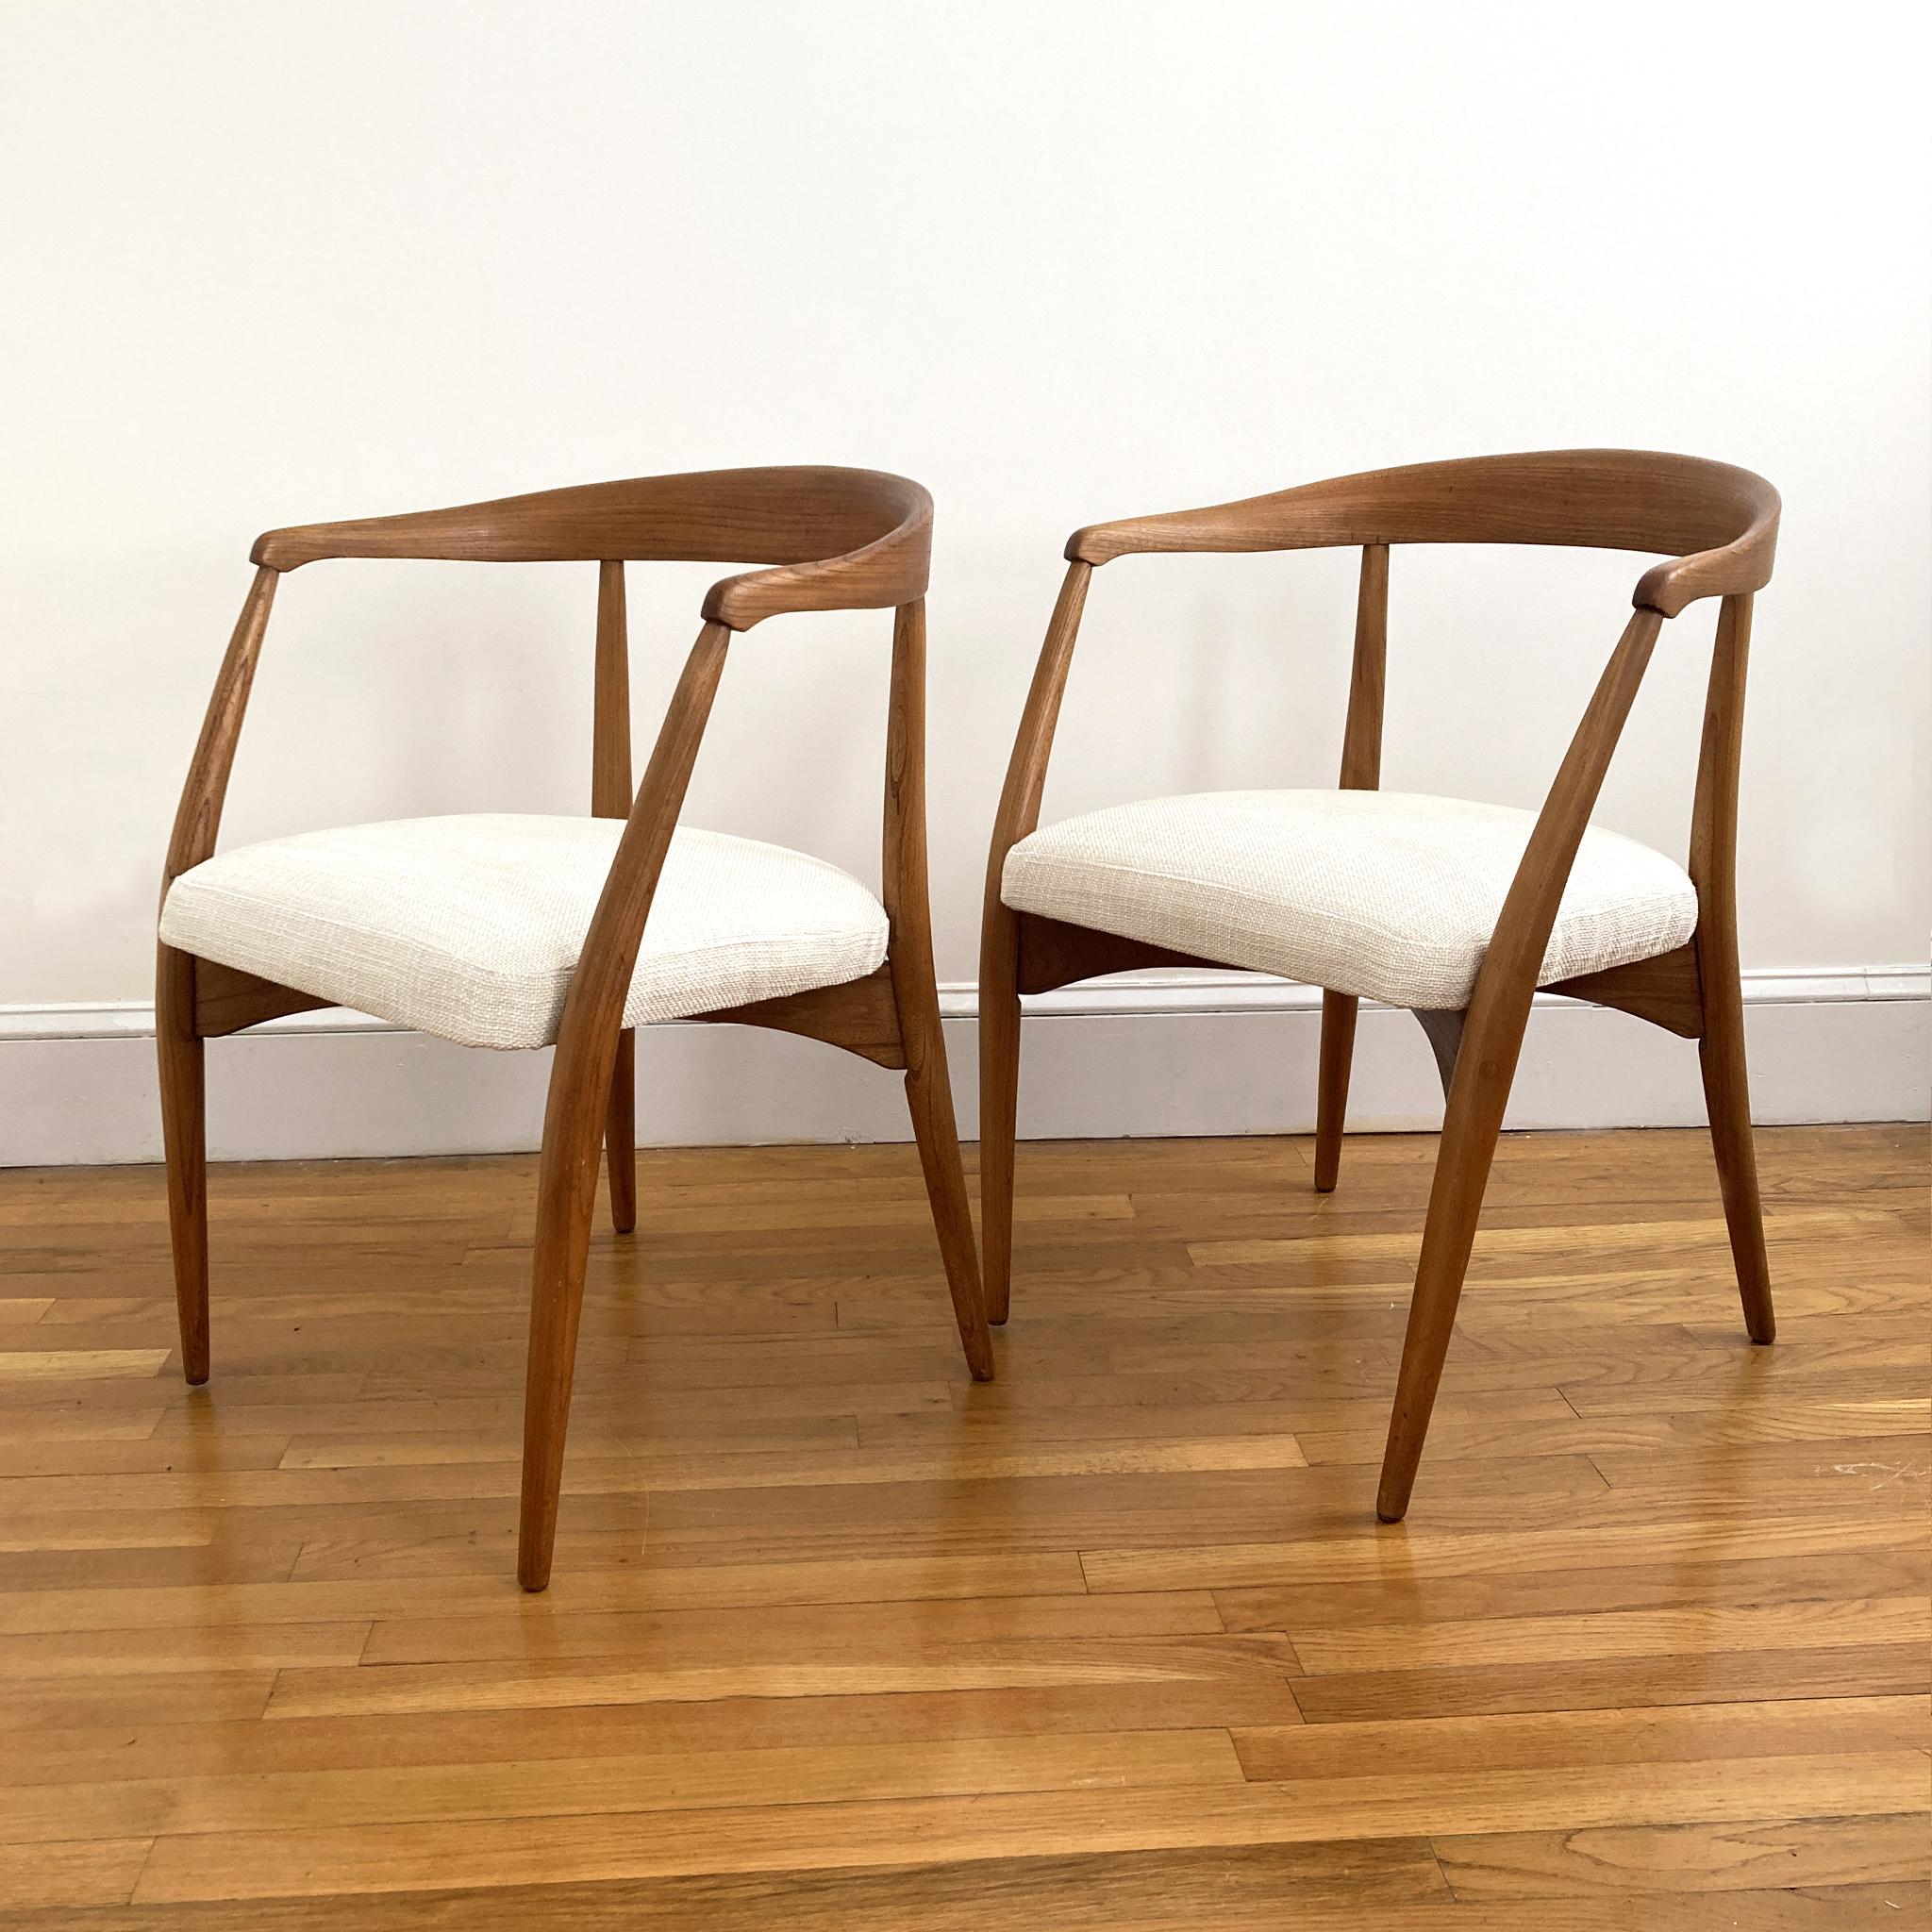 Mid-20th Century Pair of 1960's Lawrence Peabody for Nemschoff Midcentury Chairs Reupholstered